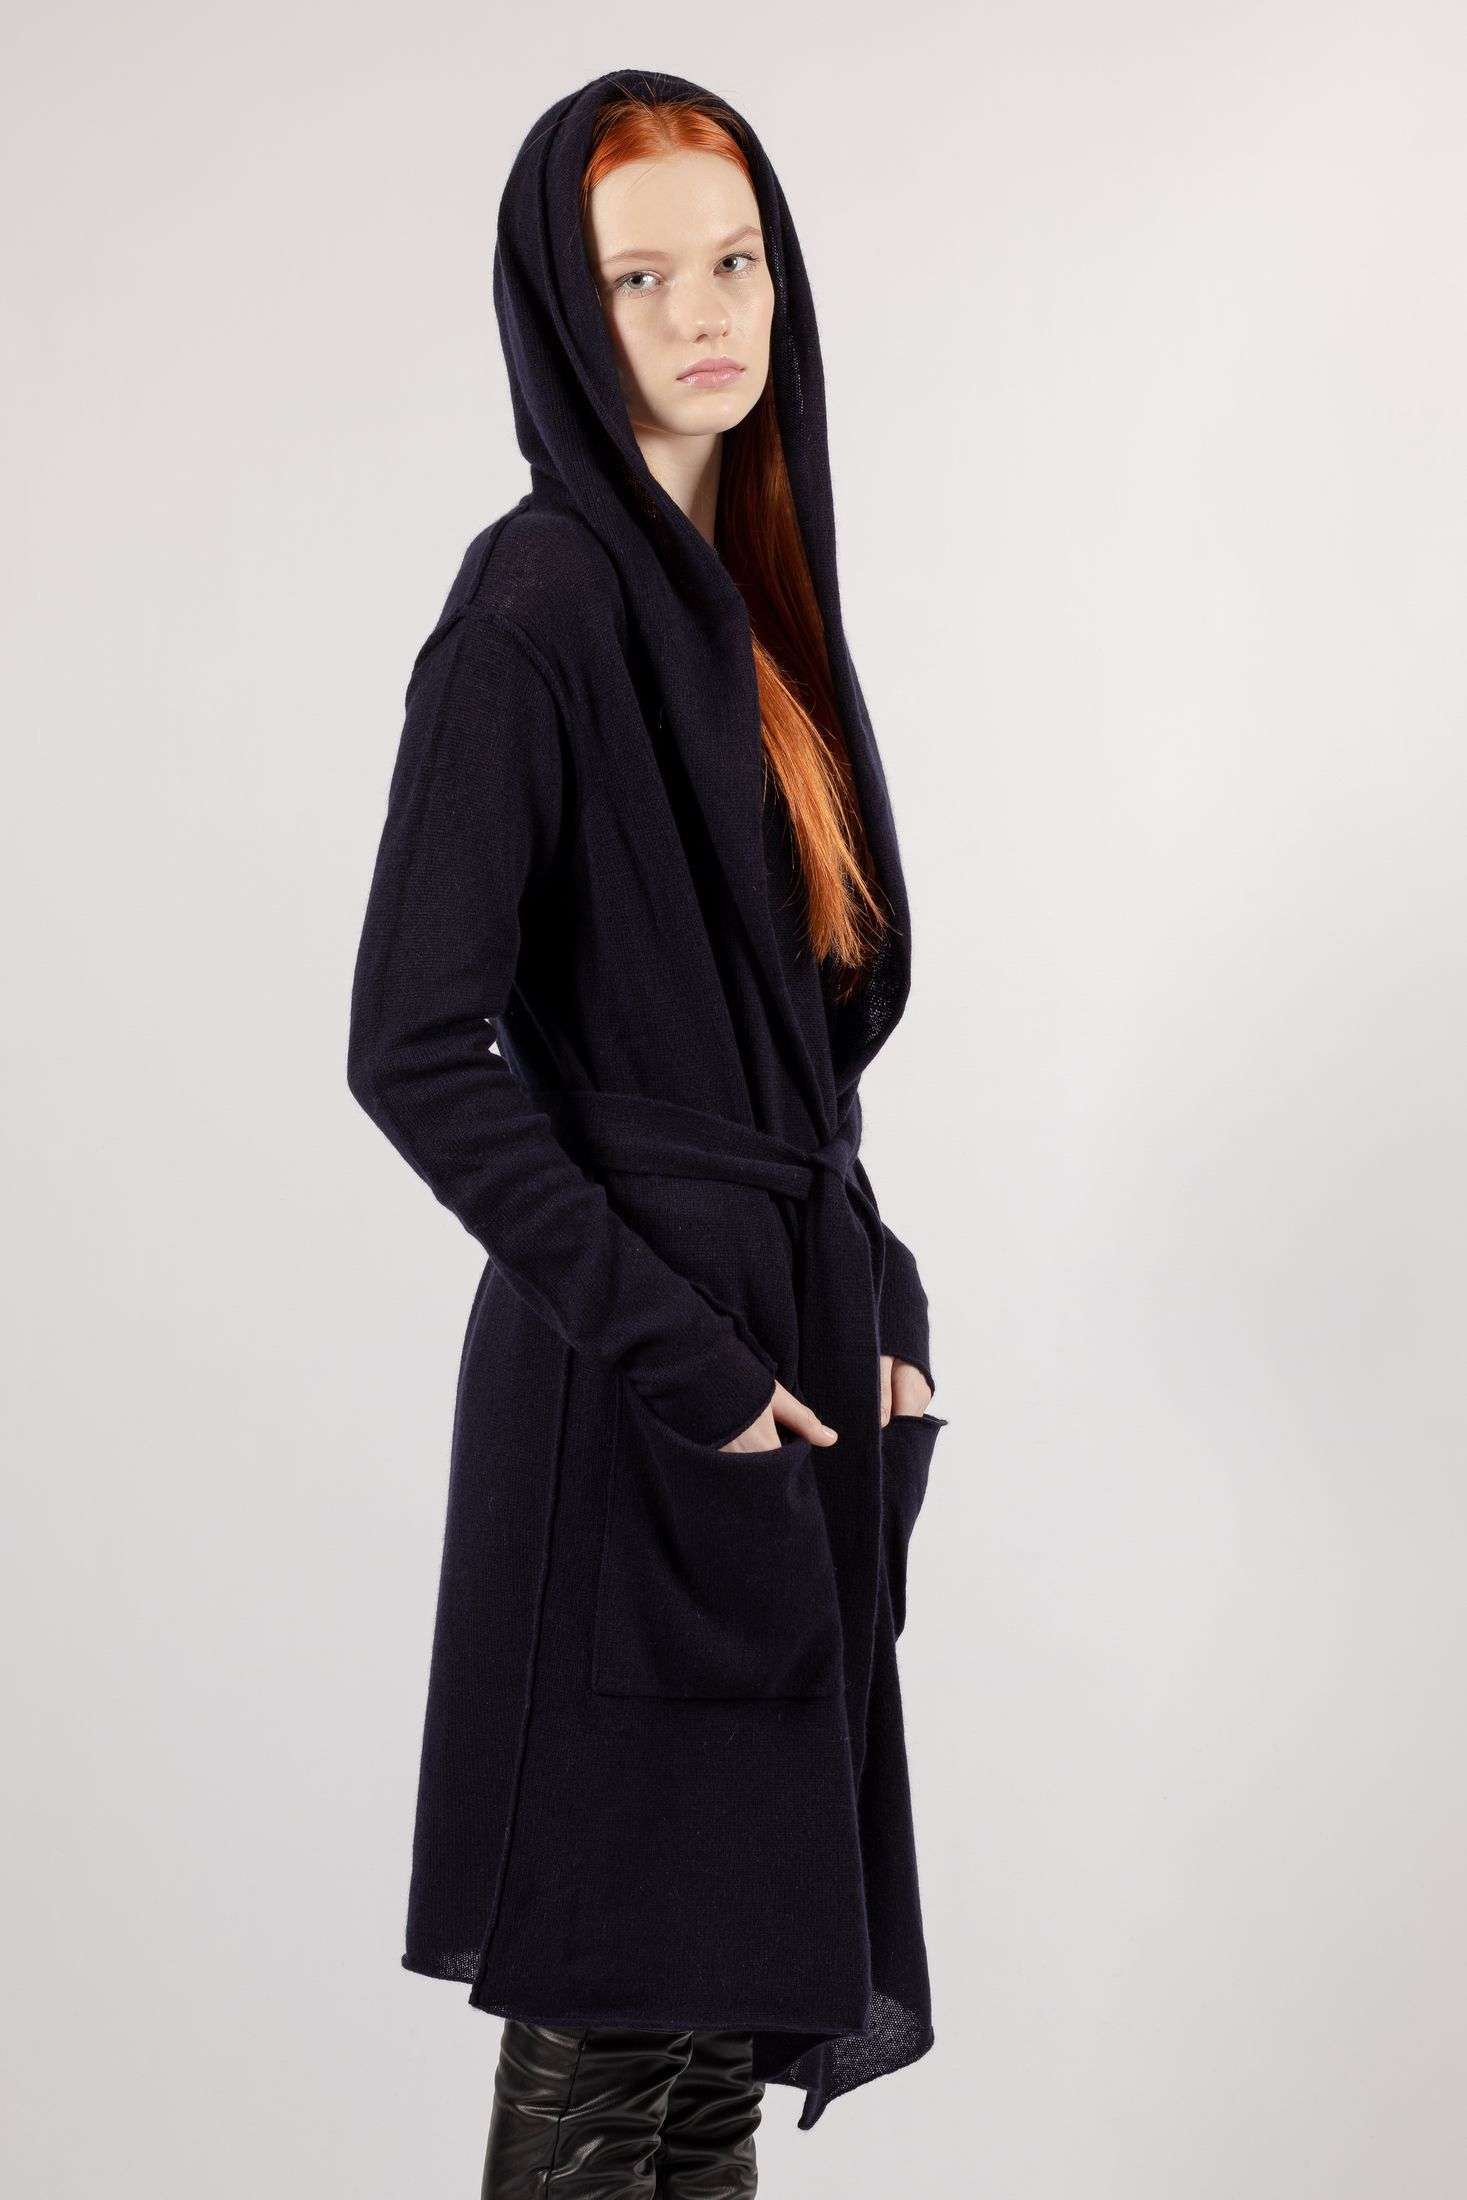 Stay Cozy in the Alethe Dark Blue Cashmere Hooded Cardigan